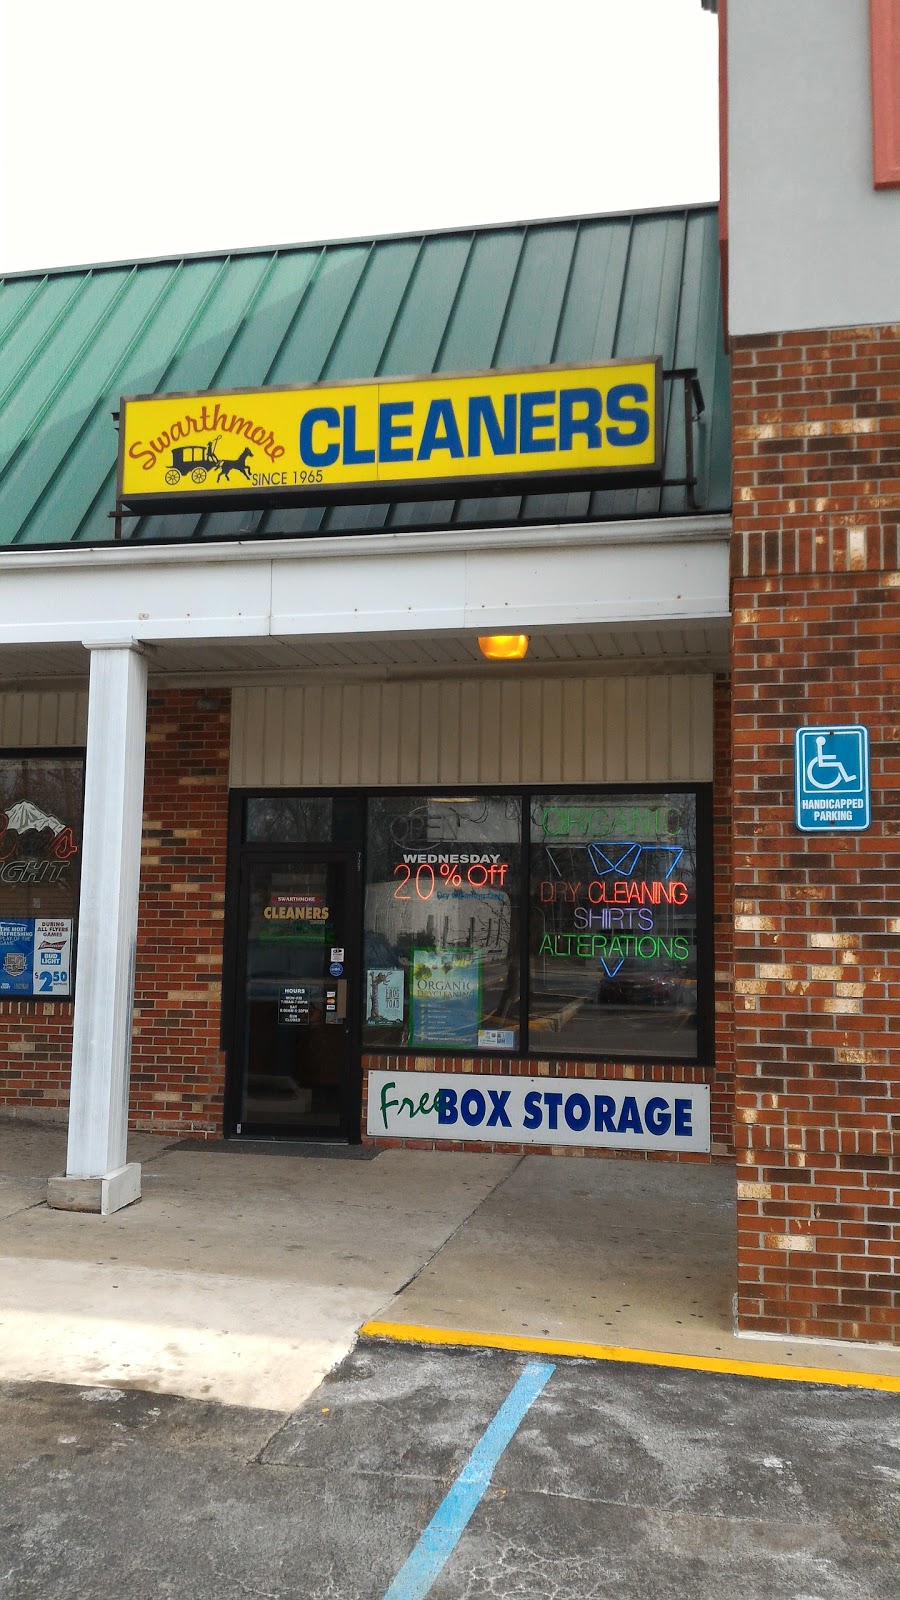 Swarthmore Dry Cleaners Inc. | 729 S Chester Rd, Swarthmore, PA 19081 | Phone: (610) 543-8808